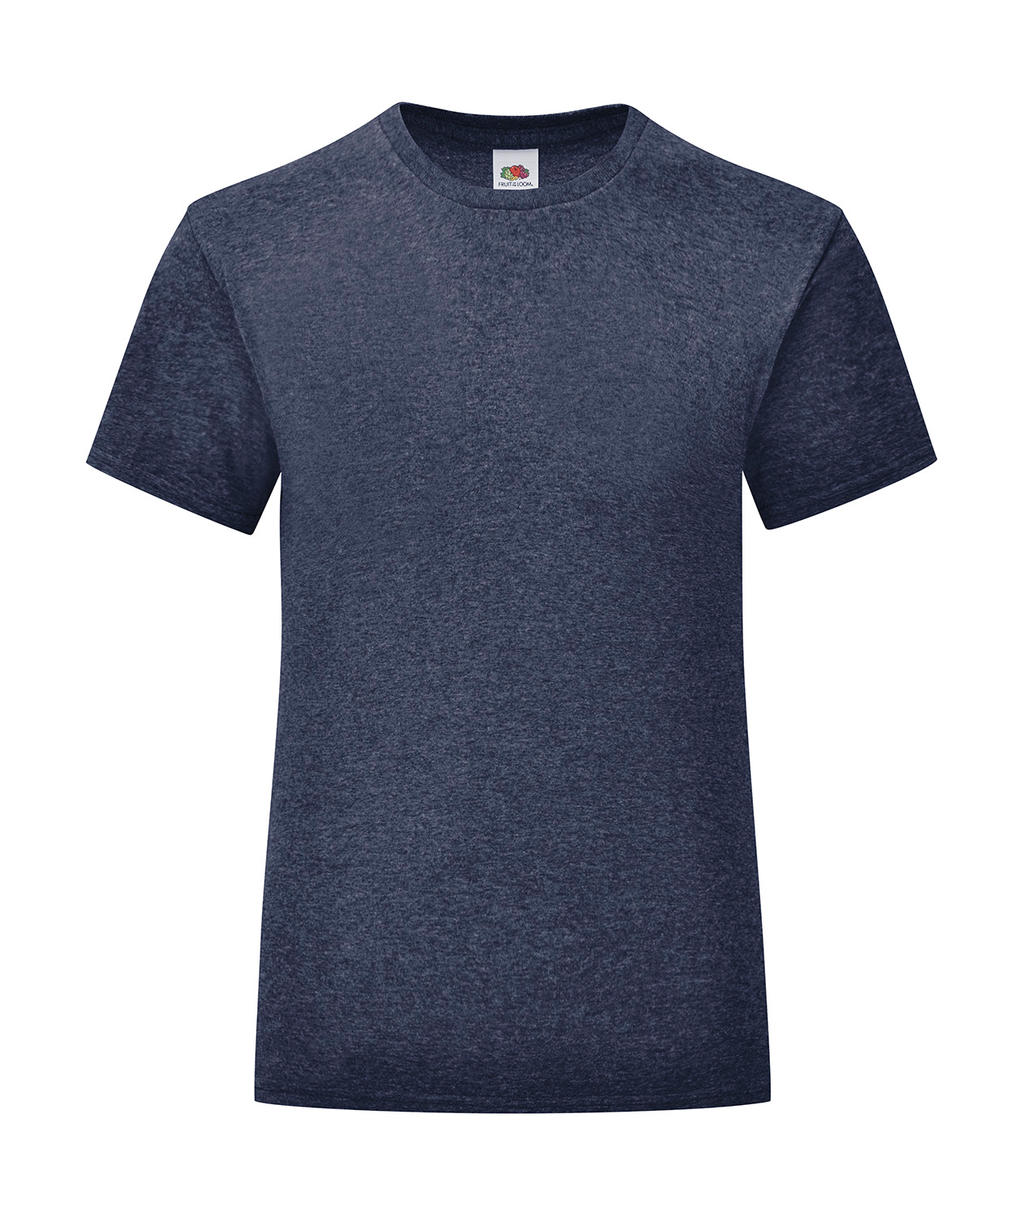  Girls Iconic 150 T in Farbe Heather Navy